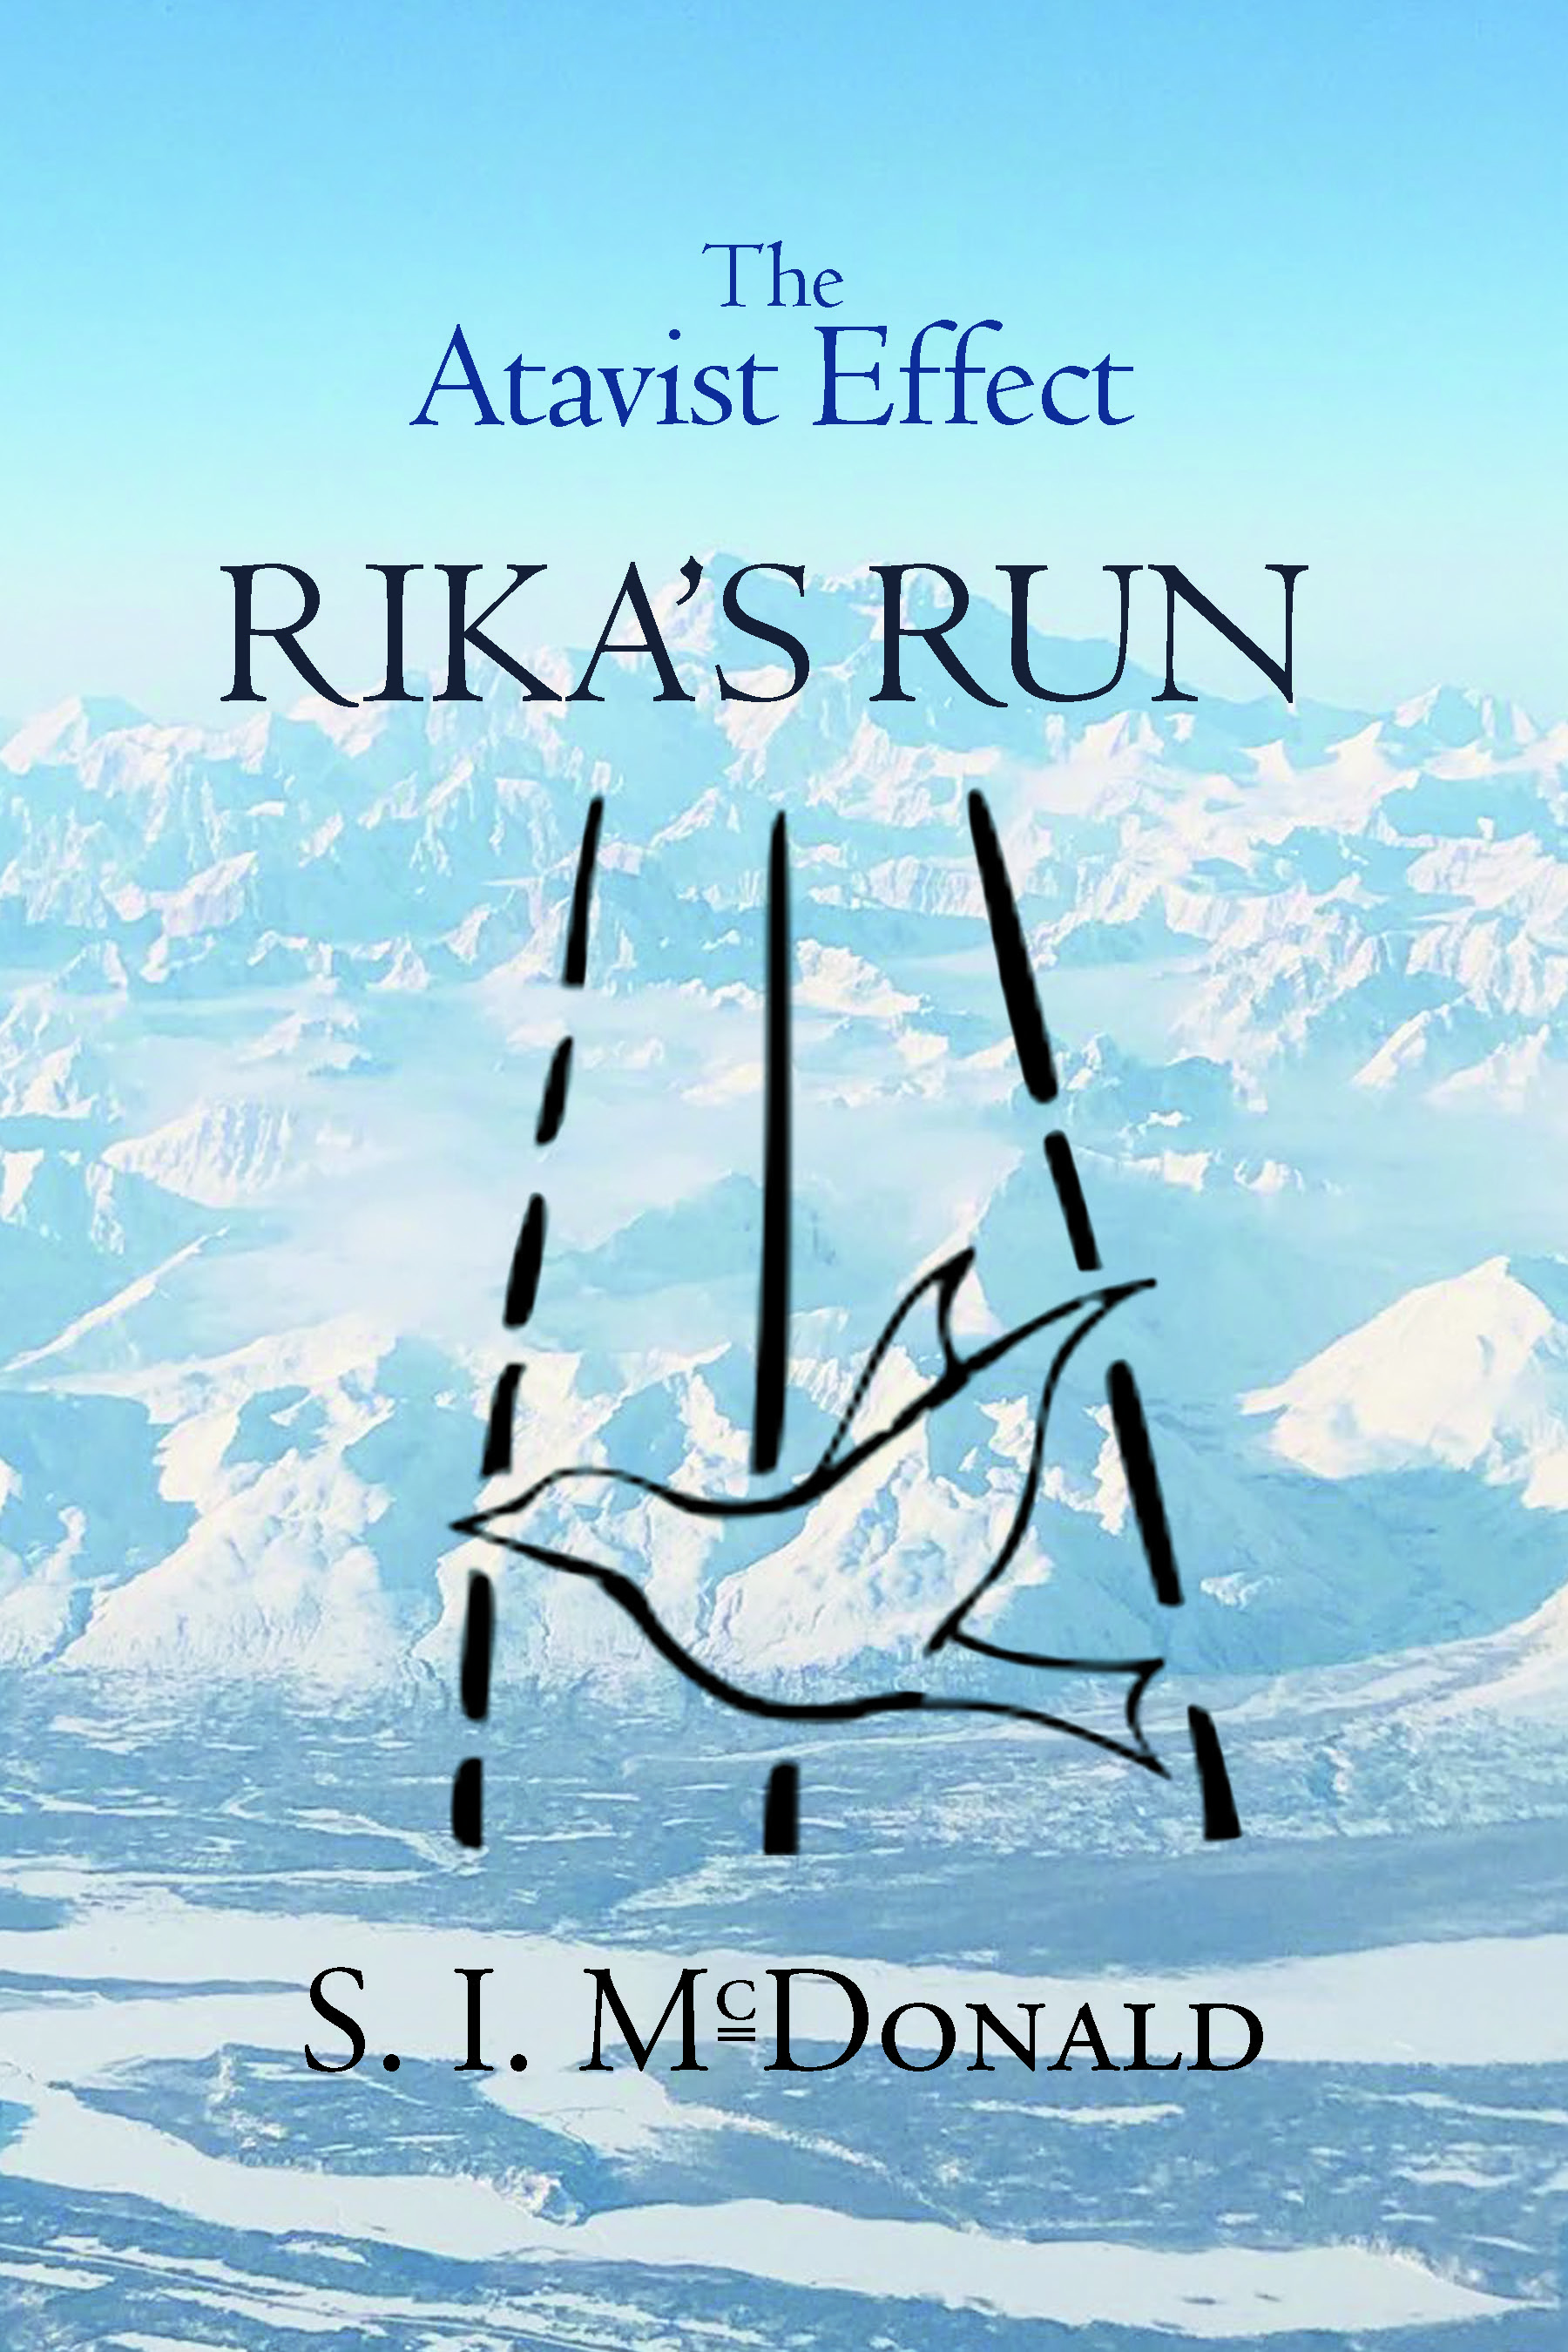 Author S. I. McDonald’s New Book, “The Atavist Effect: Rika's Run,” Explores How One Girl Changed the Course of History Forever by Sowing the Seeds of Rebellion